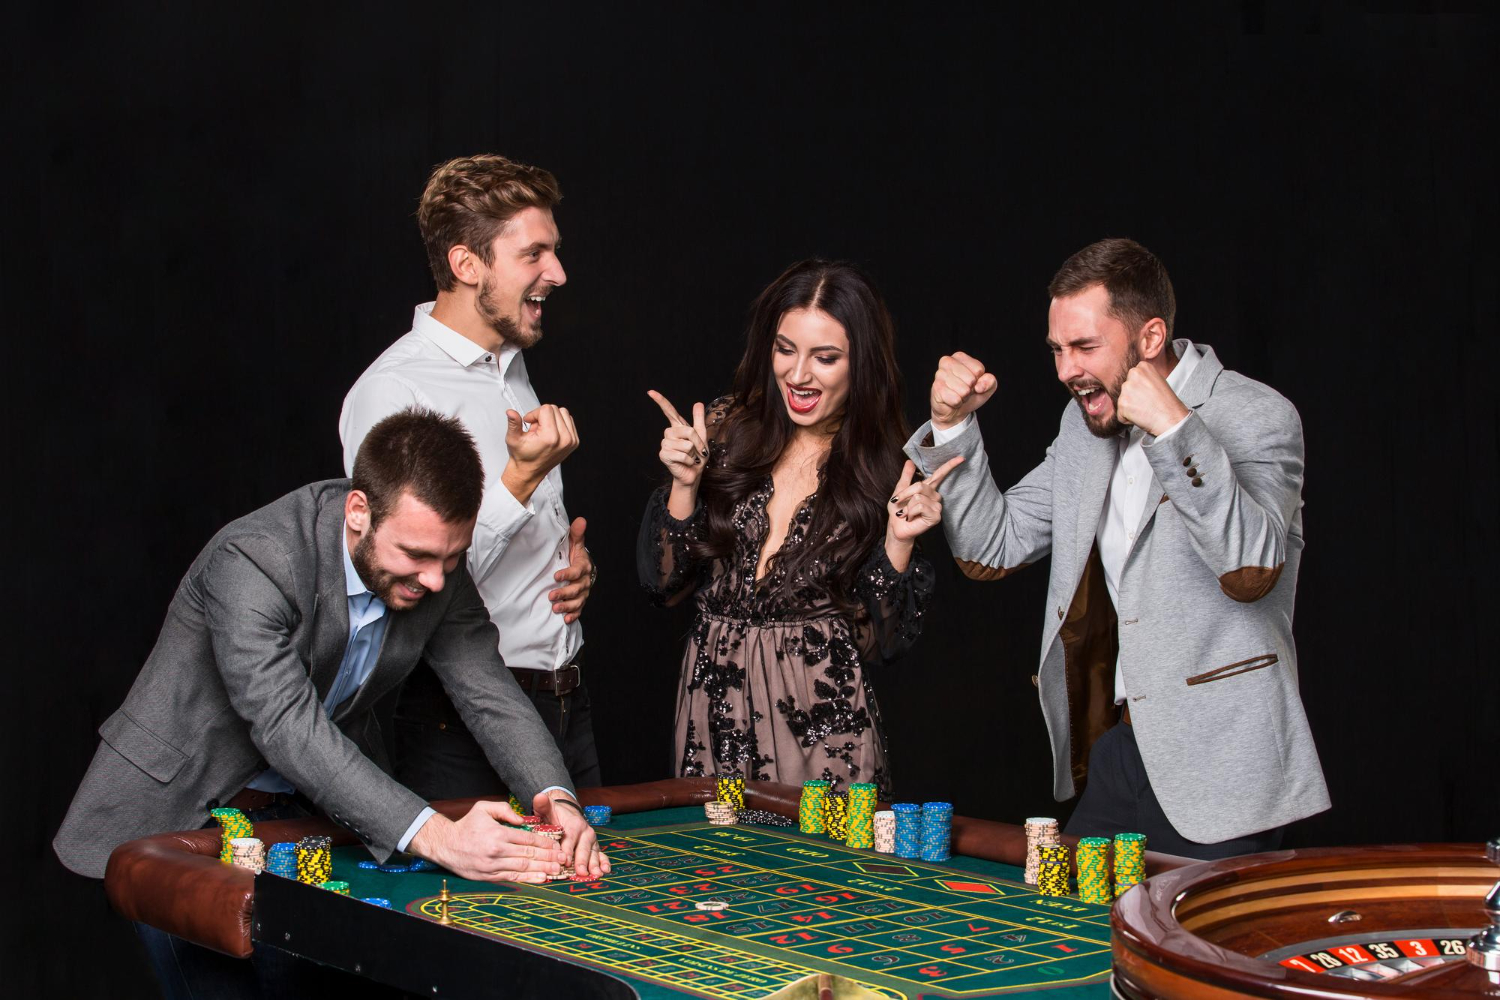 group-young-people-roulette-table-black-background-young-man-rejoices-victory